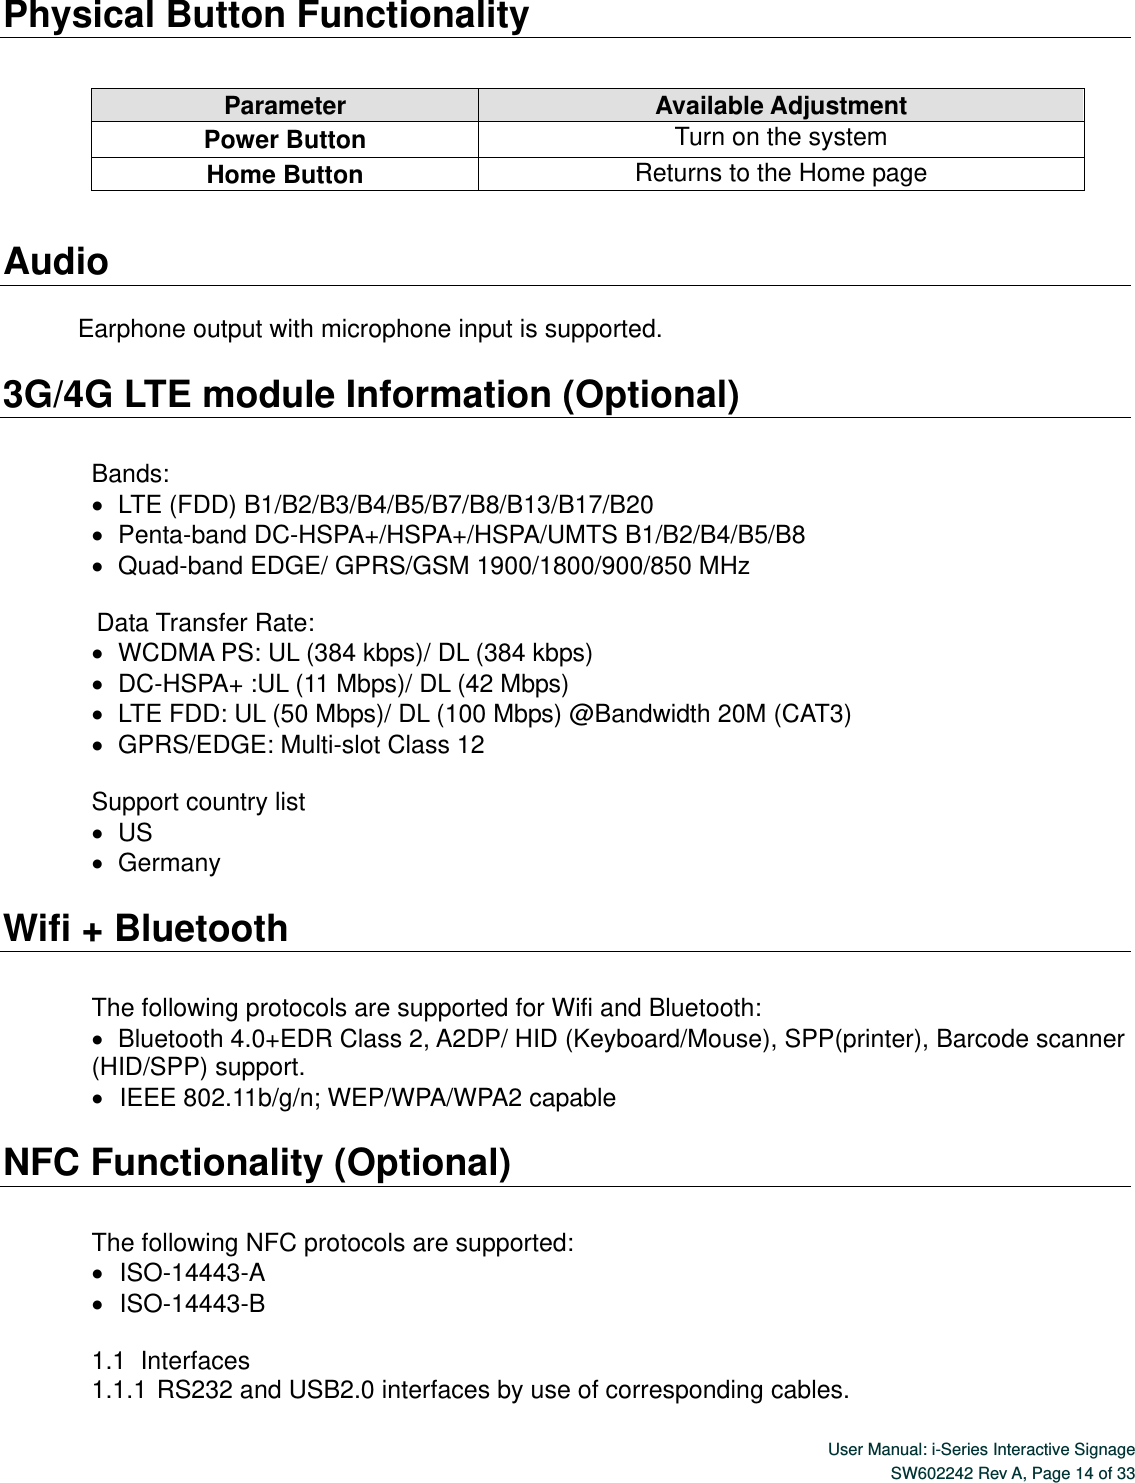  User Manual: i-Series Interactive Signage SW602242 Rev A, Page 14 of 33   Physical Button Functionality        Audio  Earphone output with microphone input is supported.  3G/4G LTE module Information (Optional)  Bands:    LTE (FDD) B1/B2/B3/B4/B5/B7/B8/B13/B17/B20      Penta-band DC-HSPA+/HSPA+/HSPA/UMTS B1/B2/B4/B5/B8    Quad-band EDGE/ GPRS/GSM 1900/1800/900/850 MHz   Data Transfer Rate:    WCDMA PS: UL (384 kbps)/ DL (384 kbps)      DC-HSPA+ :UL (11 Mbps)/ DL (42 Mbps)    LTE FDD: UL (50 Mbps)/ DL (100 Mbps) @Bandwidth 20M (CAT3)    GPRS/EDGE: Multi-slot Class 12  Support country list      US    Germany  Wifi + Bluetooth  The following protocols are supported for Wifi and Bluetooth:    Bluetooth 4.0+EDR Class 2, A2DP/ HID (Keyboard/Mouse), SPP(printer), Barcode scanner (HID/SPP) support.    IEEE 802.11b/g/n; WEP/WPA/WPA2 capable  NFC Functionality (Optional)  The following NFC protocols are supported:    ISO-14443-A    ISO-14443-B  1.1   Interfaces 1.1.1 RS232 and USB2.0 interfaces by use of corresponding cables. Parameter Available Adjustment Power Button Turn on the system Home Button Returns to the Home page 